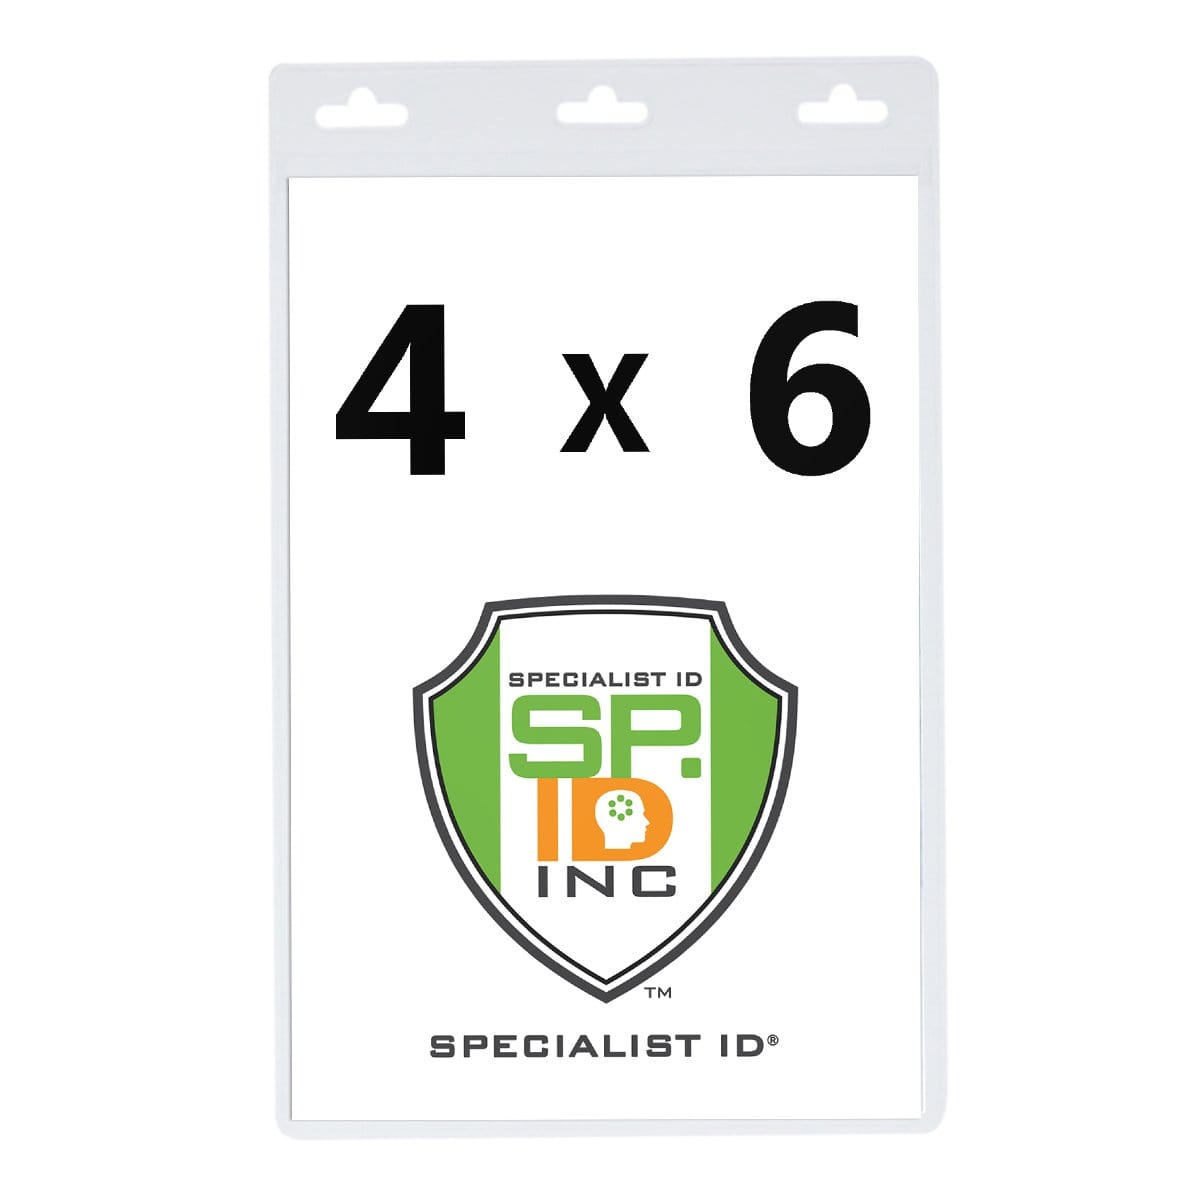 A Vertical Oversized 4X6 Vinyl ID Badge Holder (XL46V) displaying "4 x 6" above a green and orange shield-shaped logo with the text "Specialist ID Inc.